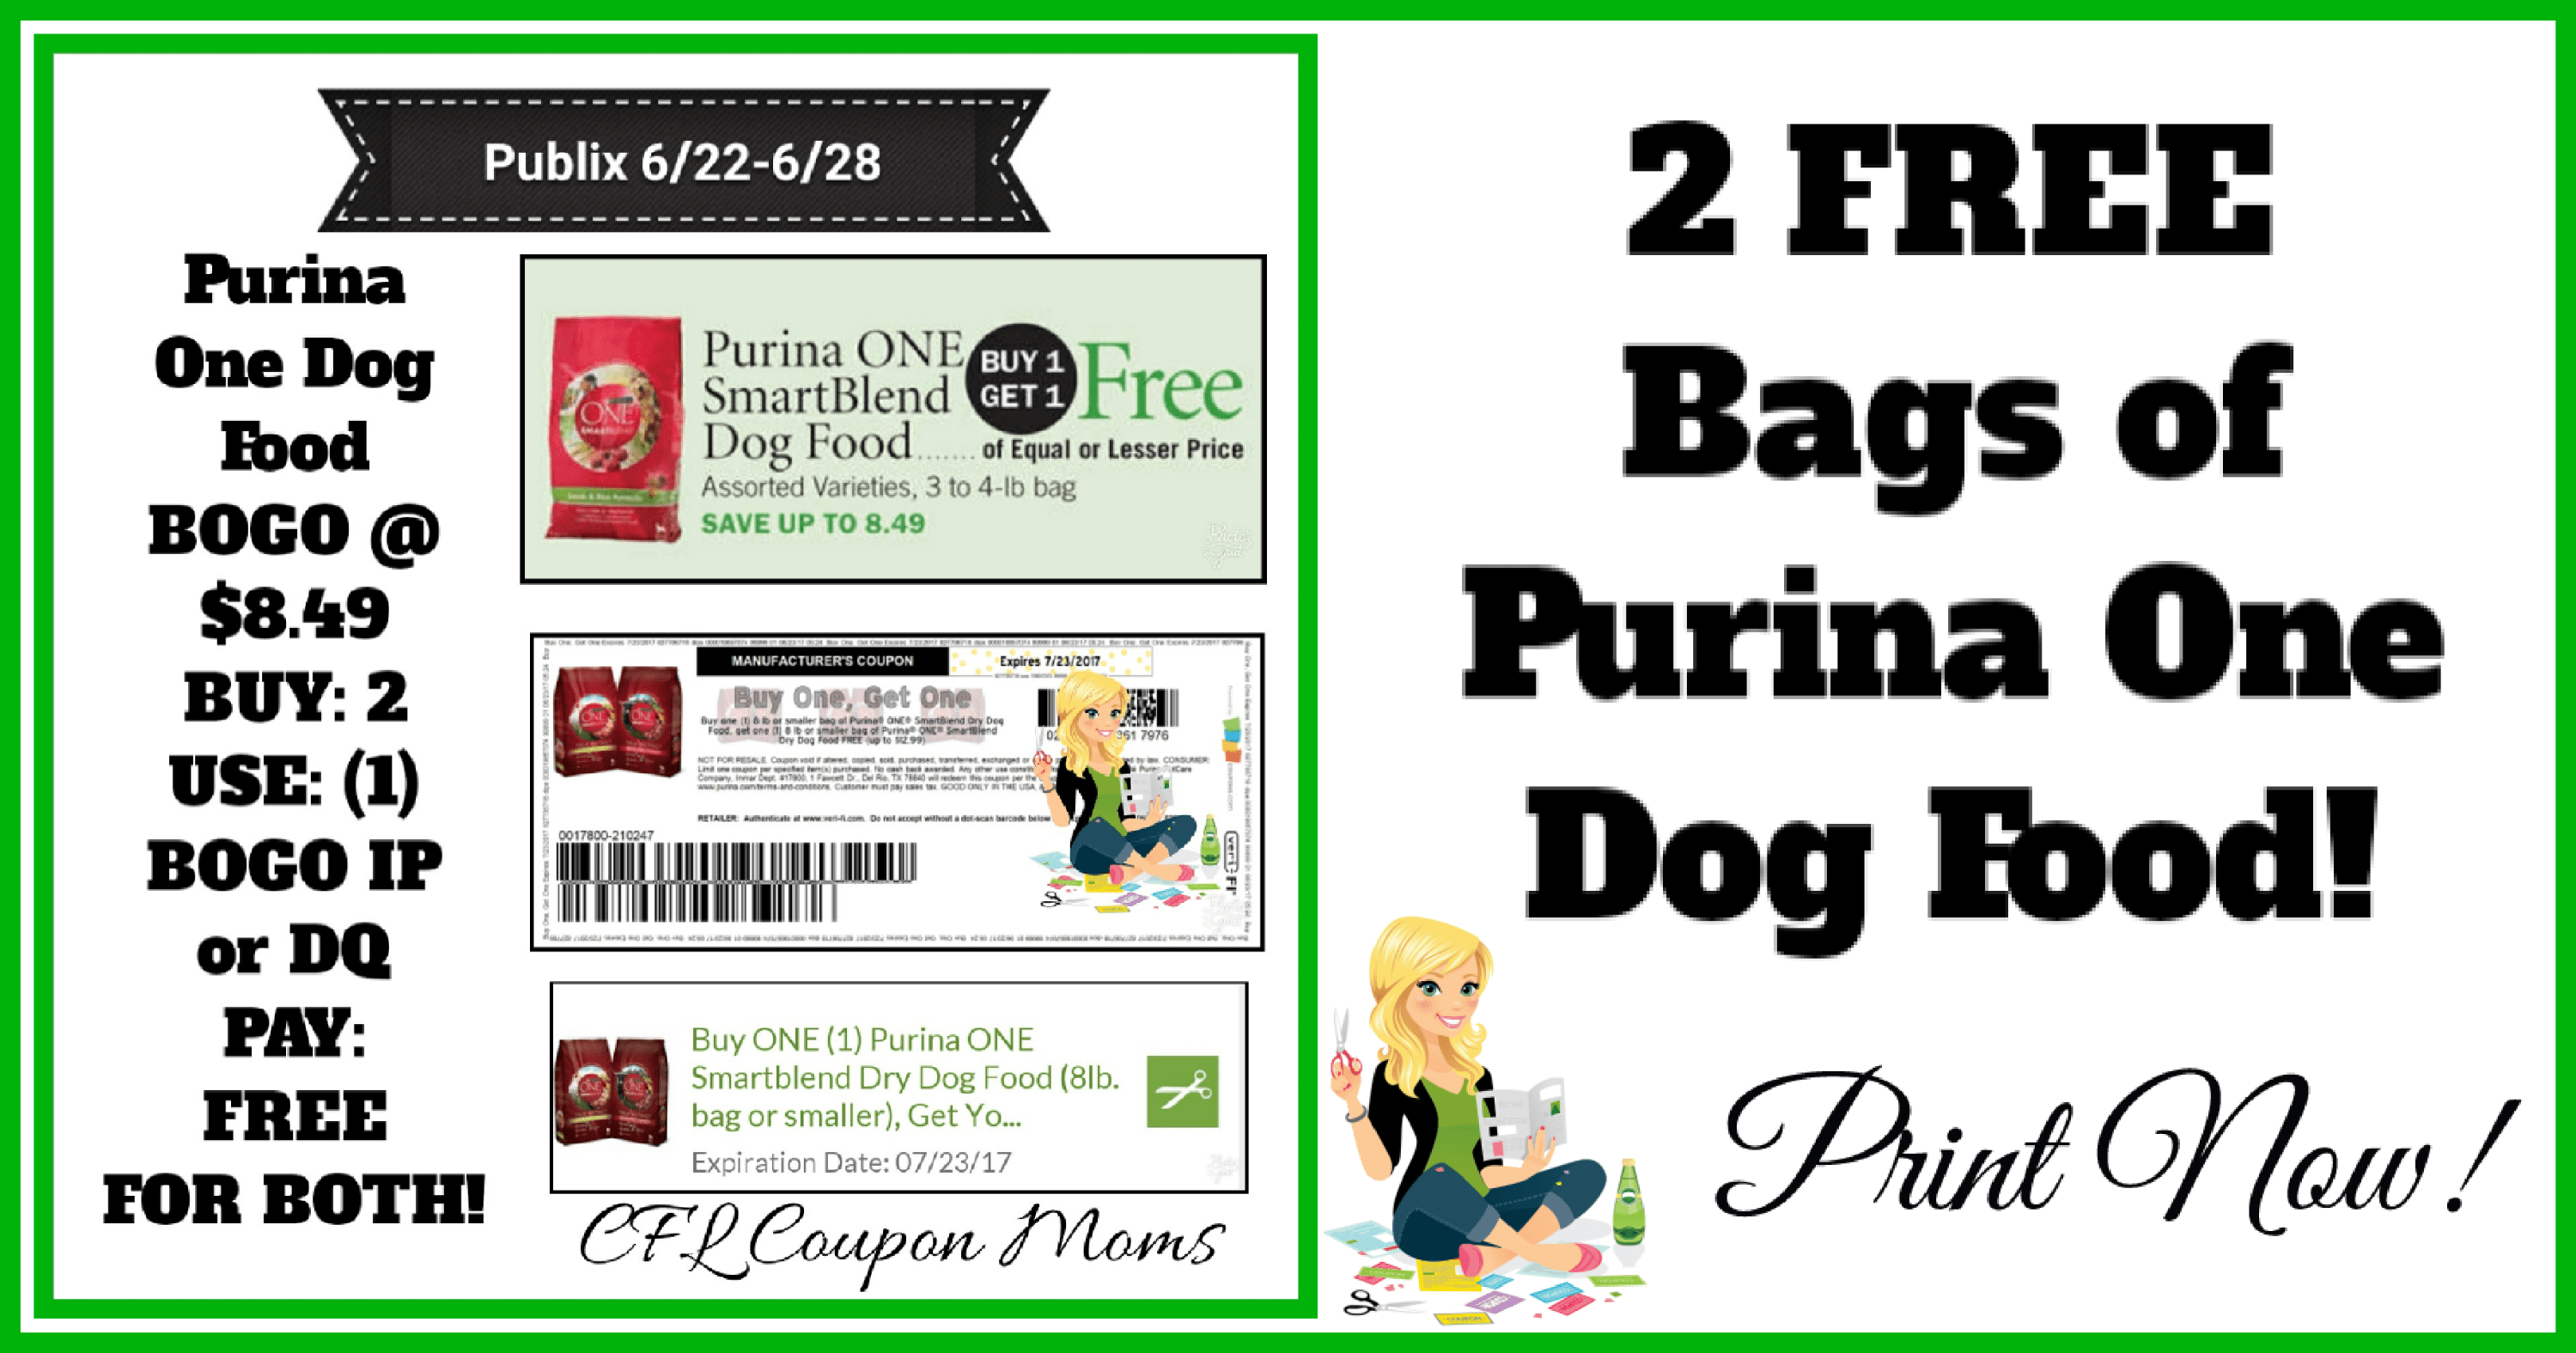 🐕publix🐕 Two (2) Free Bags Of Purina One Dog Food ~ 6/22-6/28 - Free Printable Coupons For Purina One Dog Food